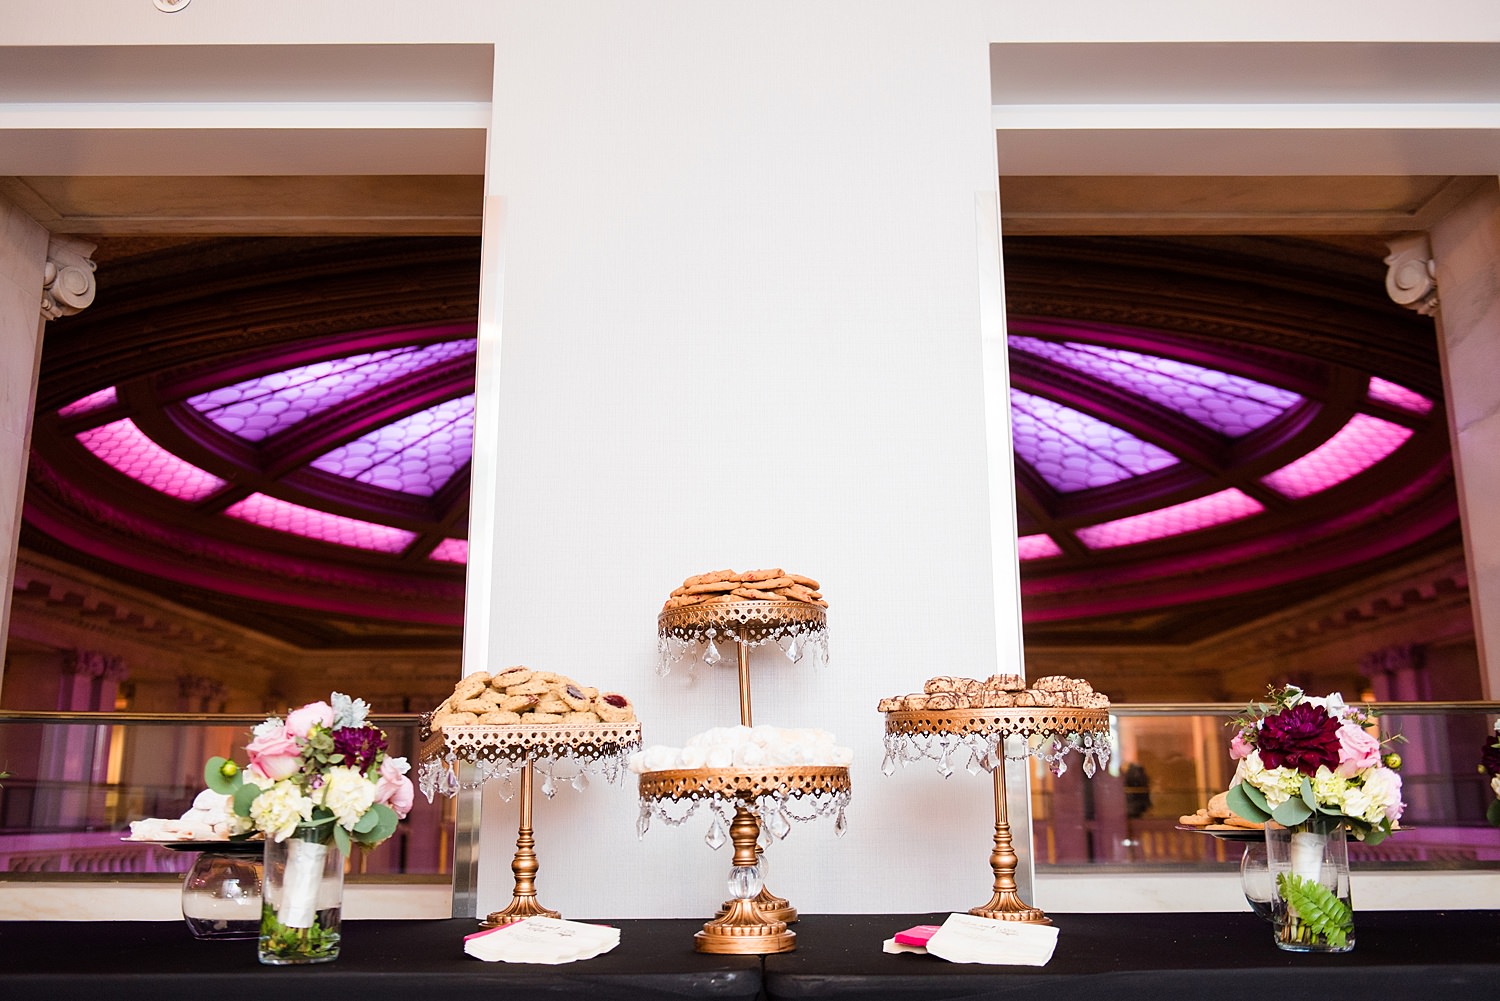 renaissance hotel pittsburgh cookie tables wedding • Renaissance Hotel Pittsburgh Weddings